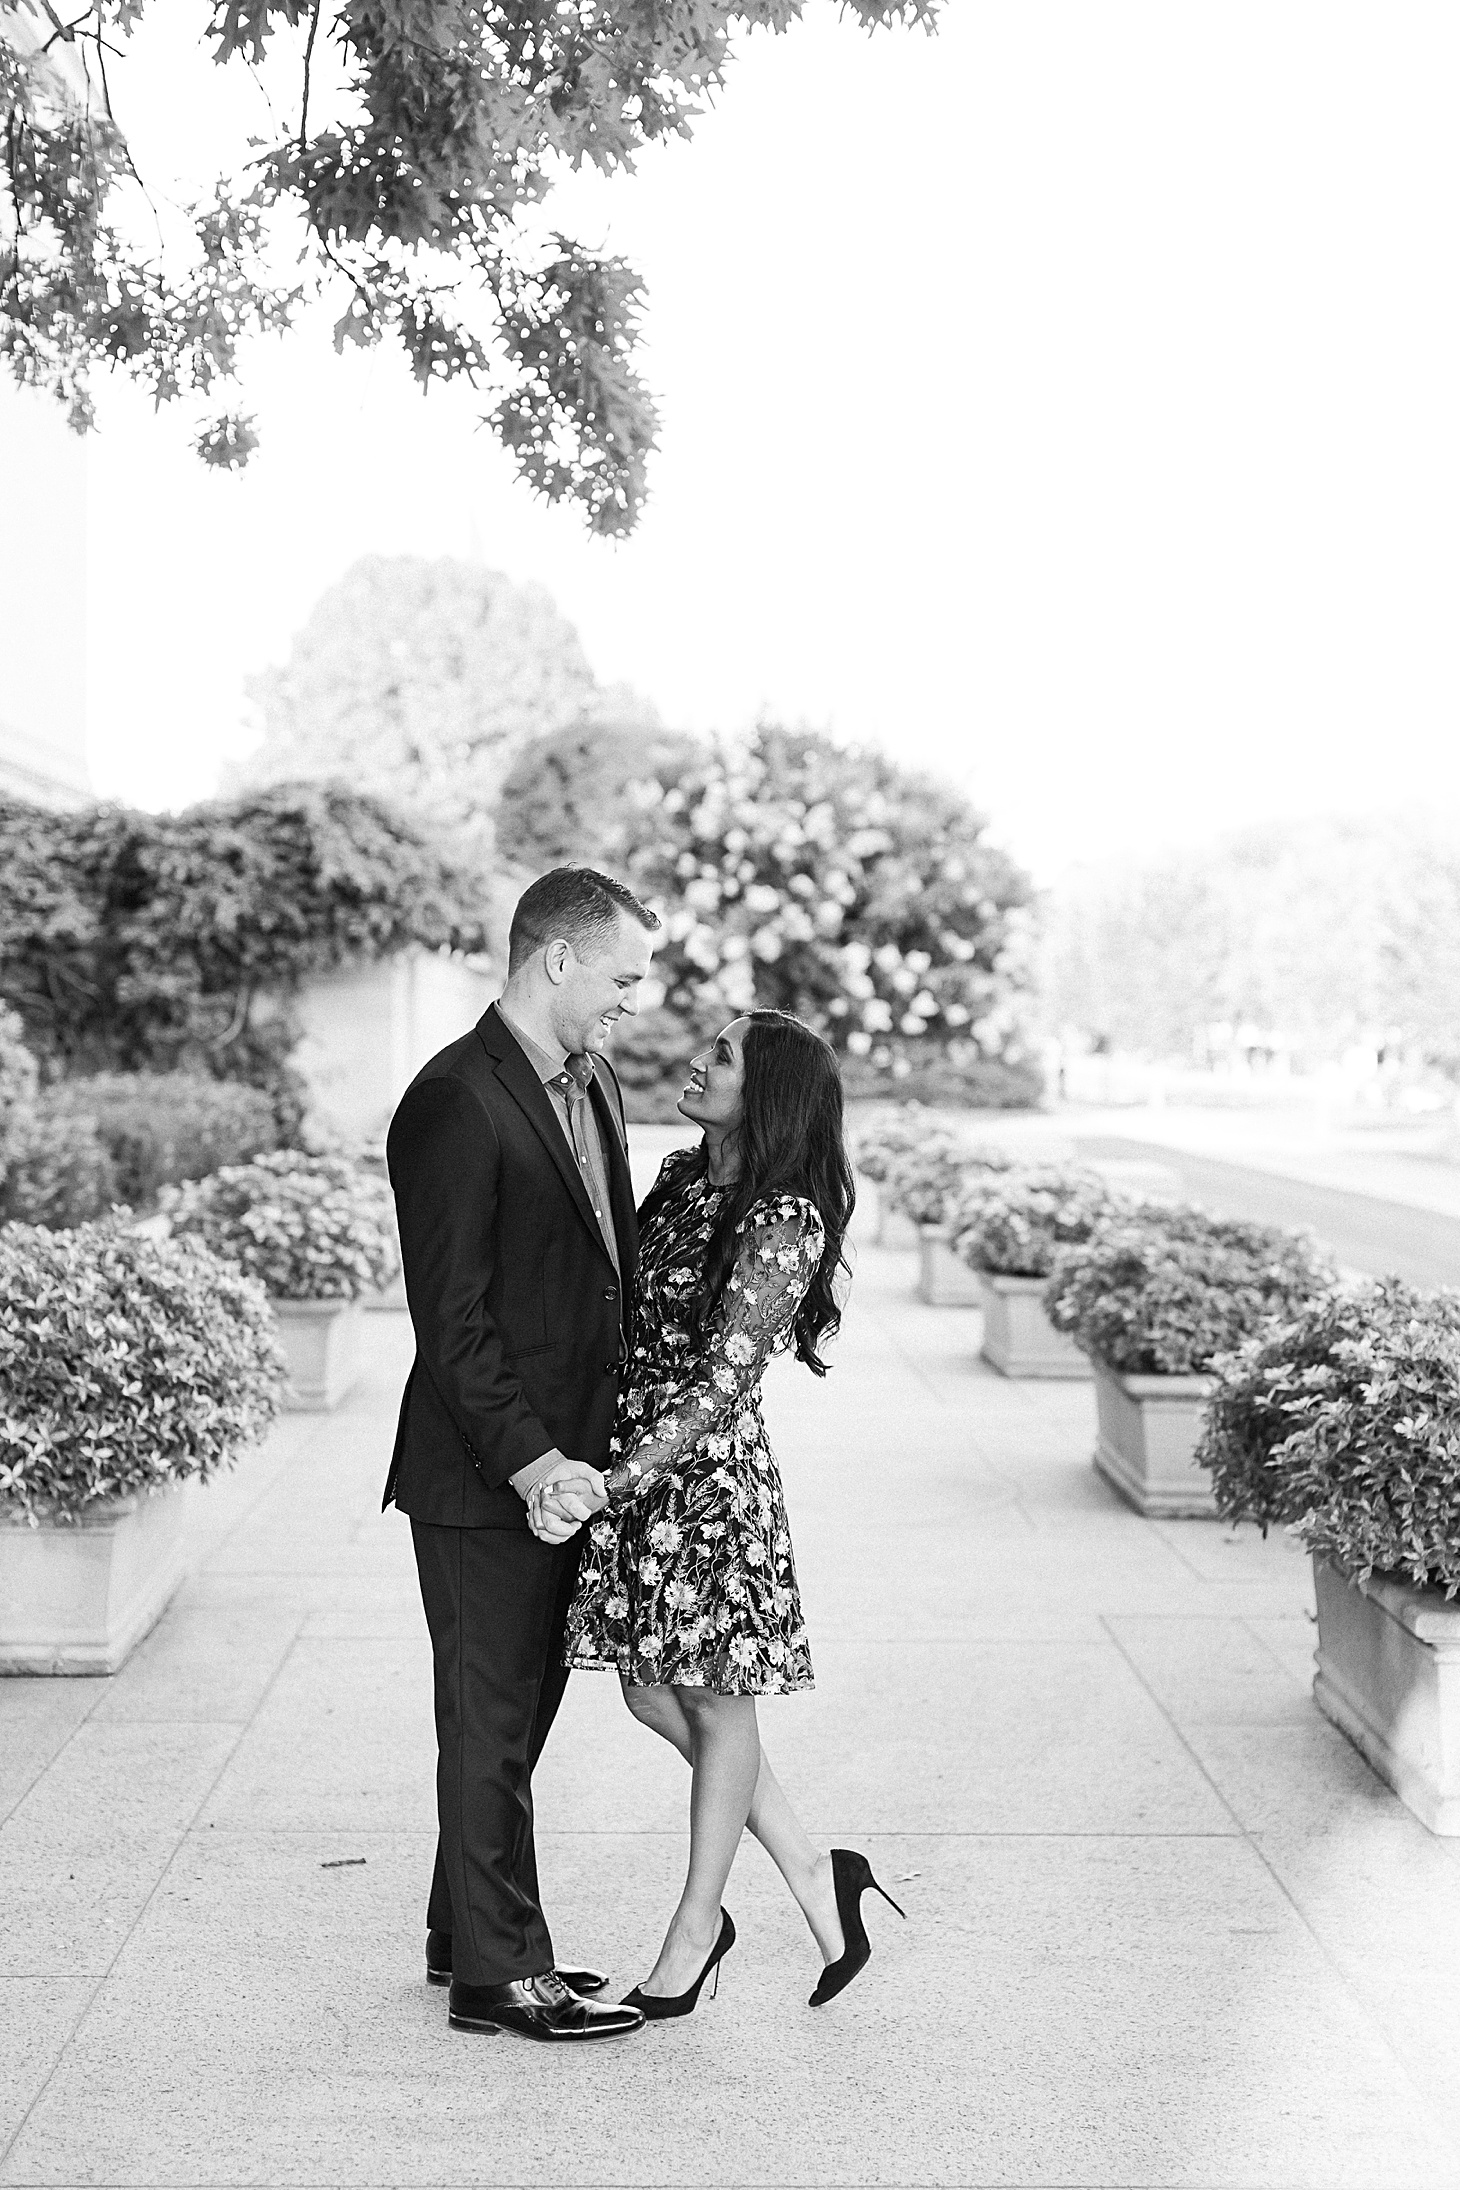 Black & White  engagement portraits at National Gallery of Art by Sarah Bradshaw Photography